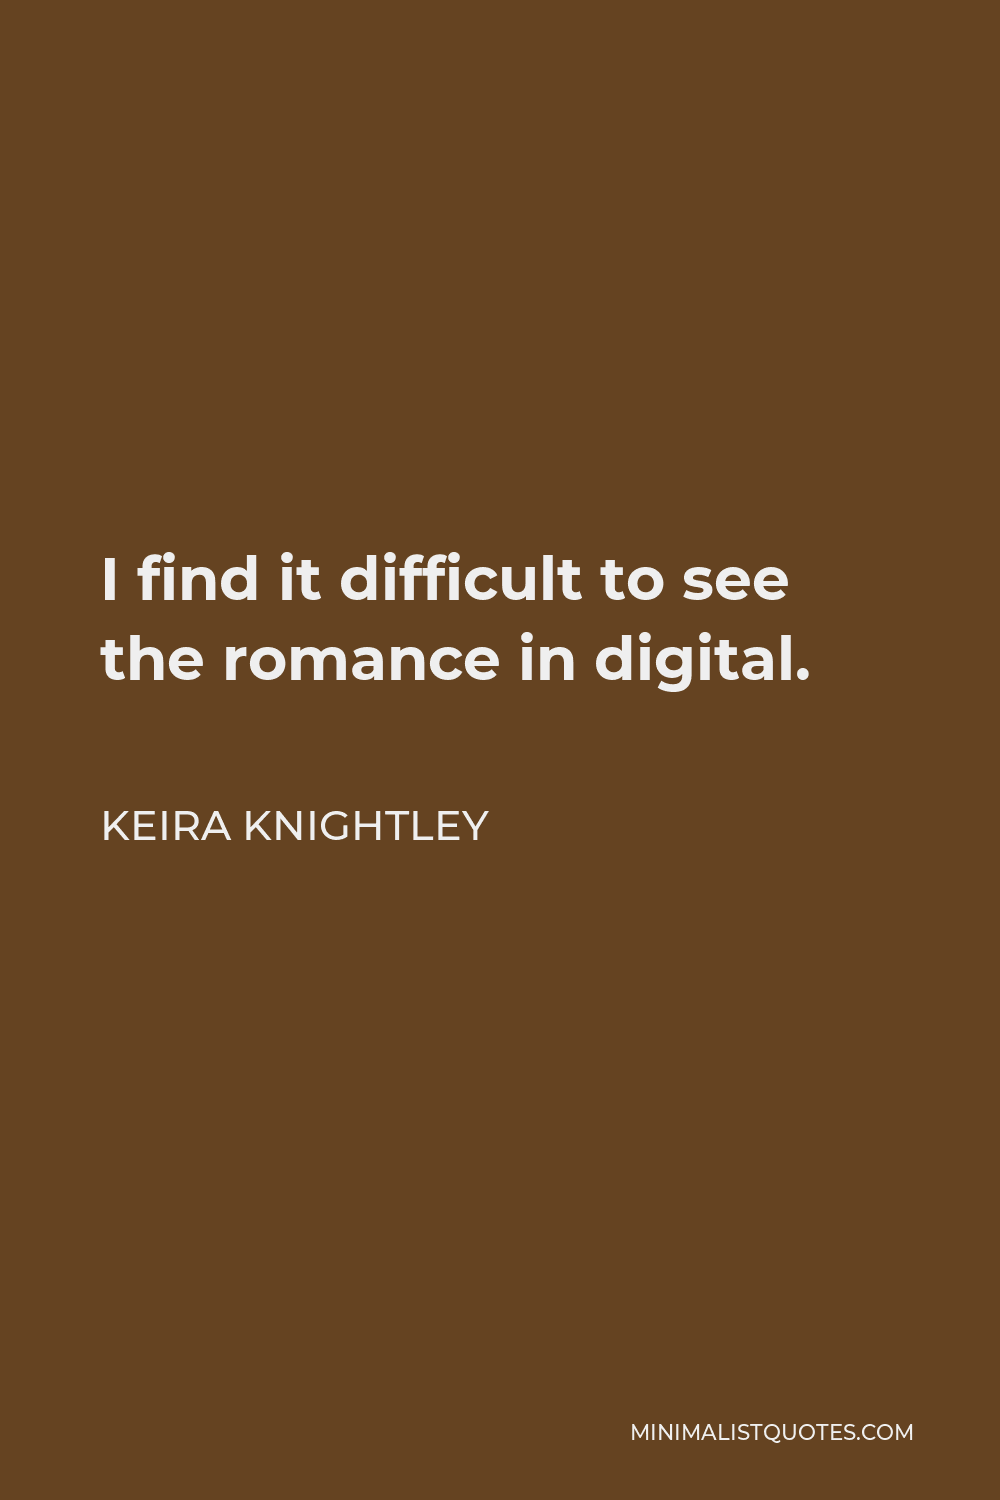 Keira Knightley Quote - I find it difficult to see the romance in digital.